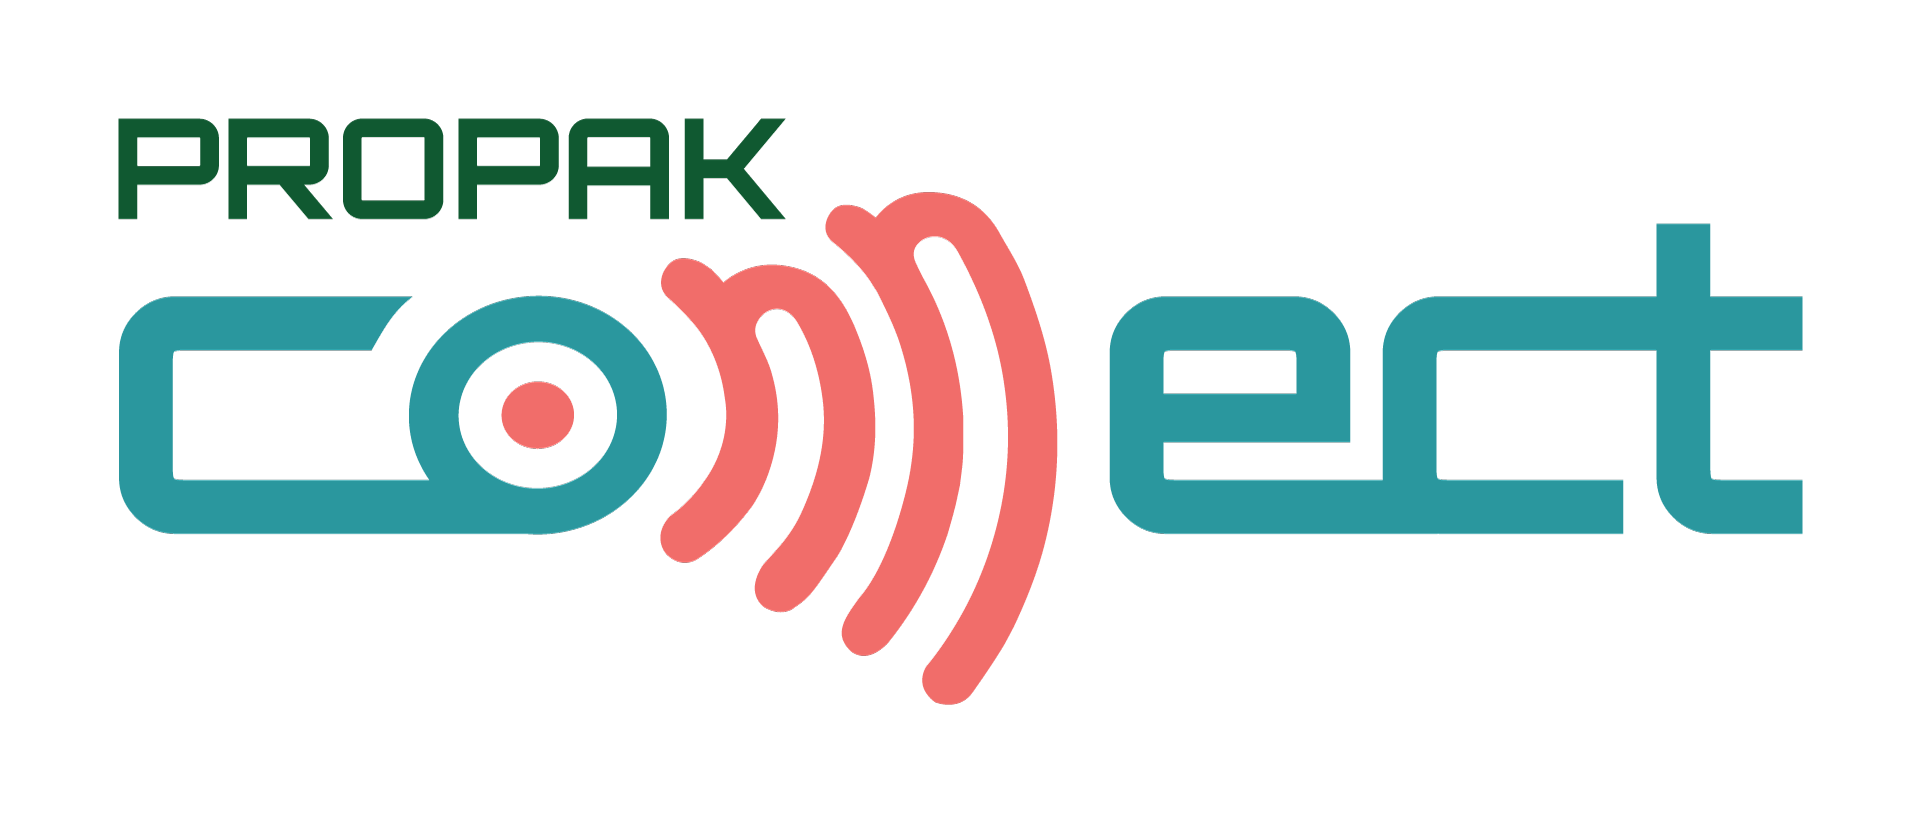 ProPak Connect - B2B community for Processing & Packaging